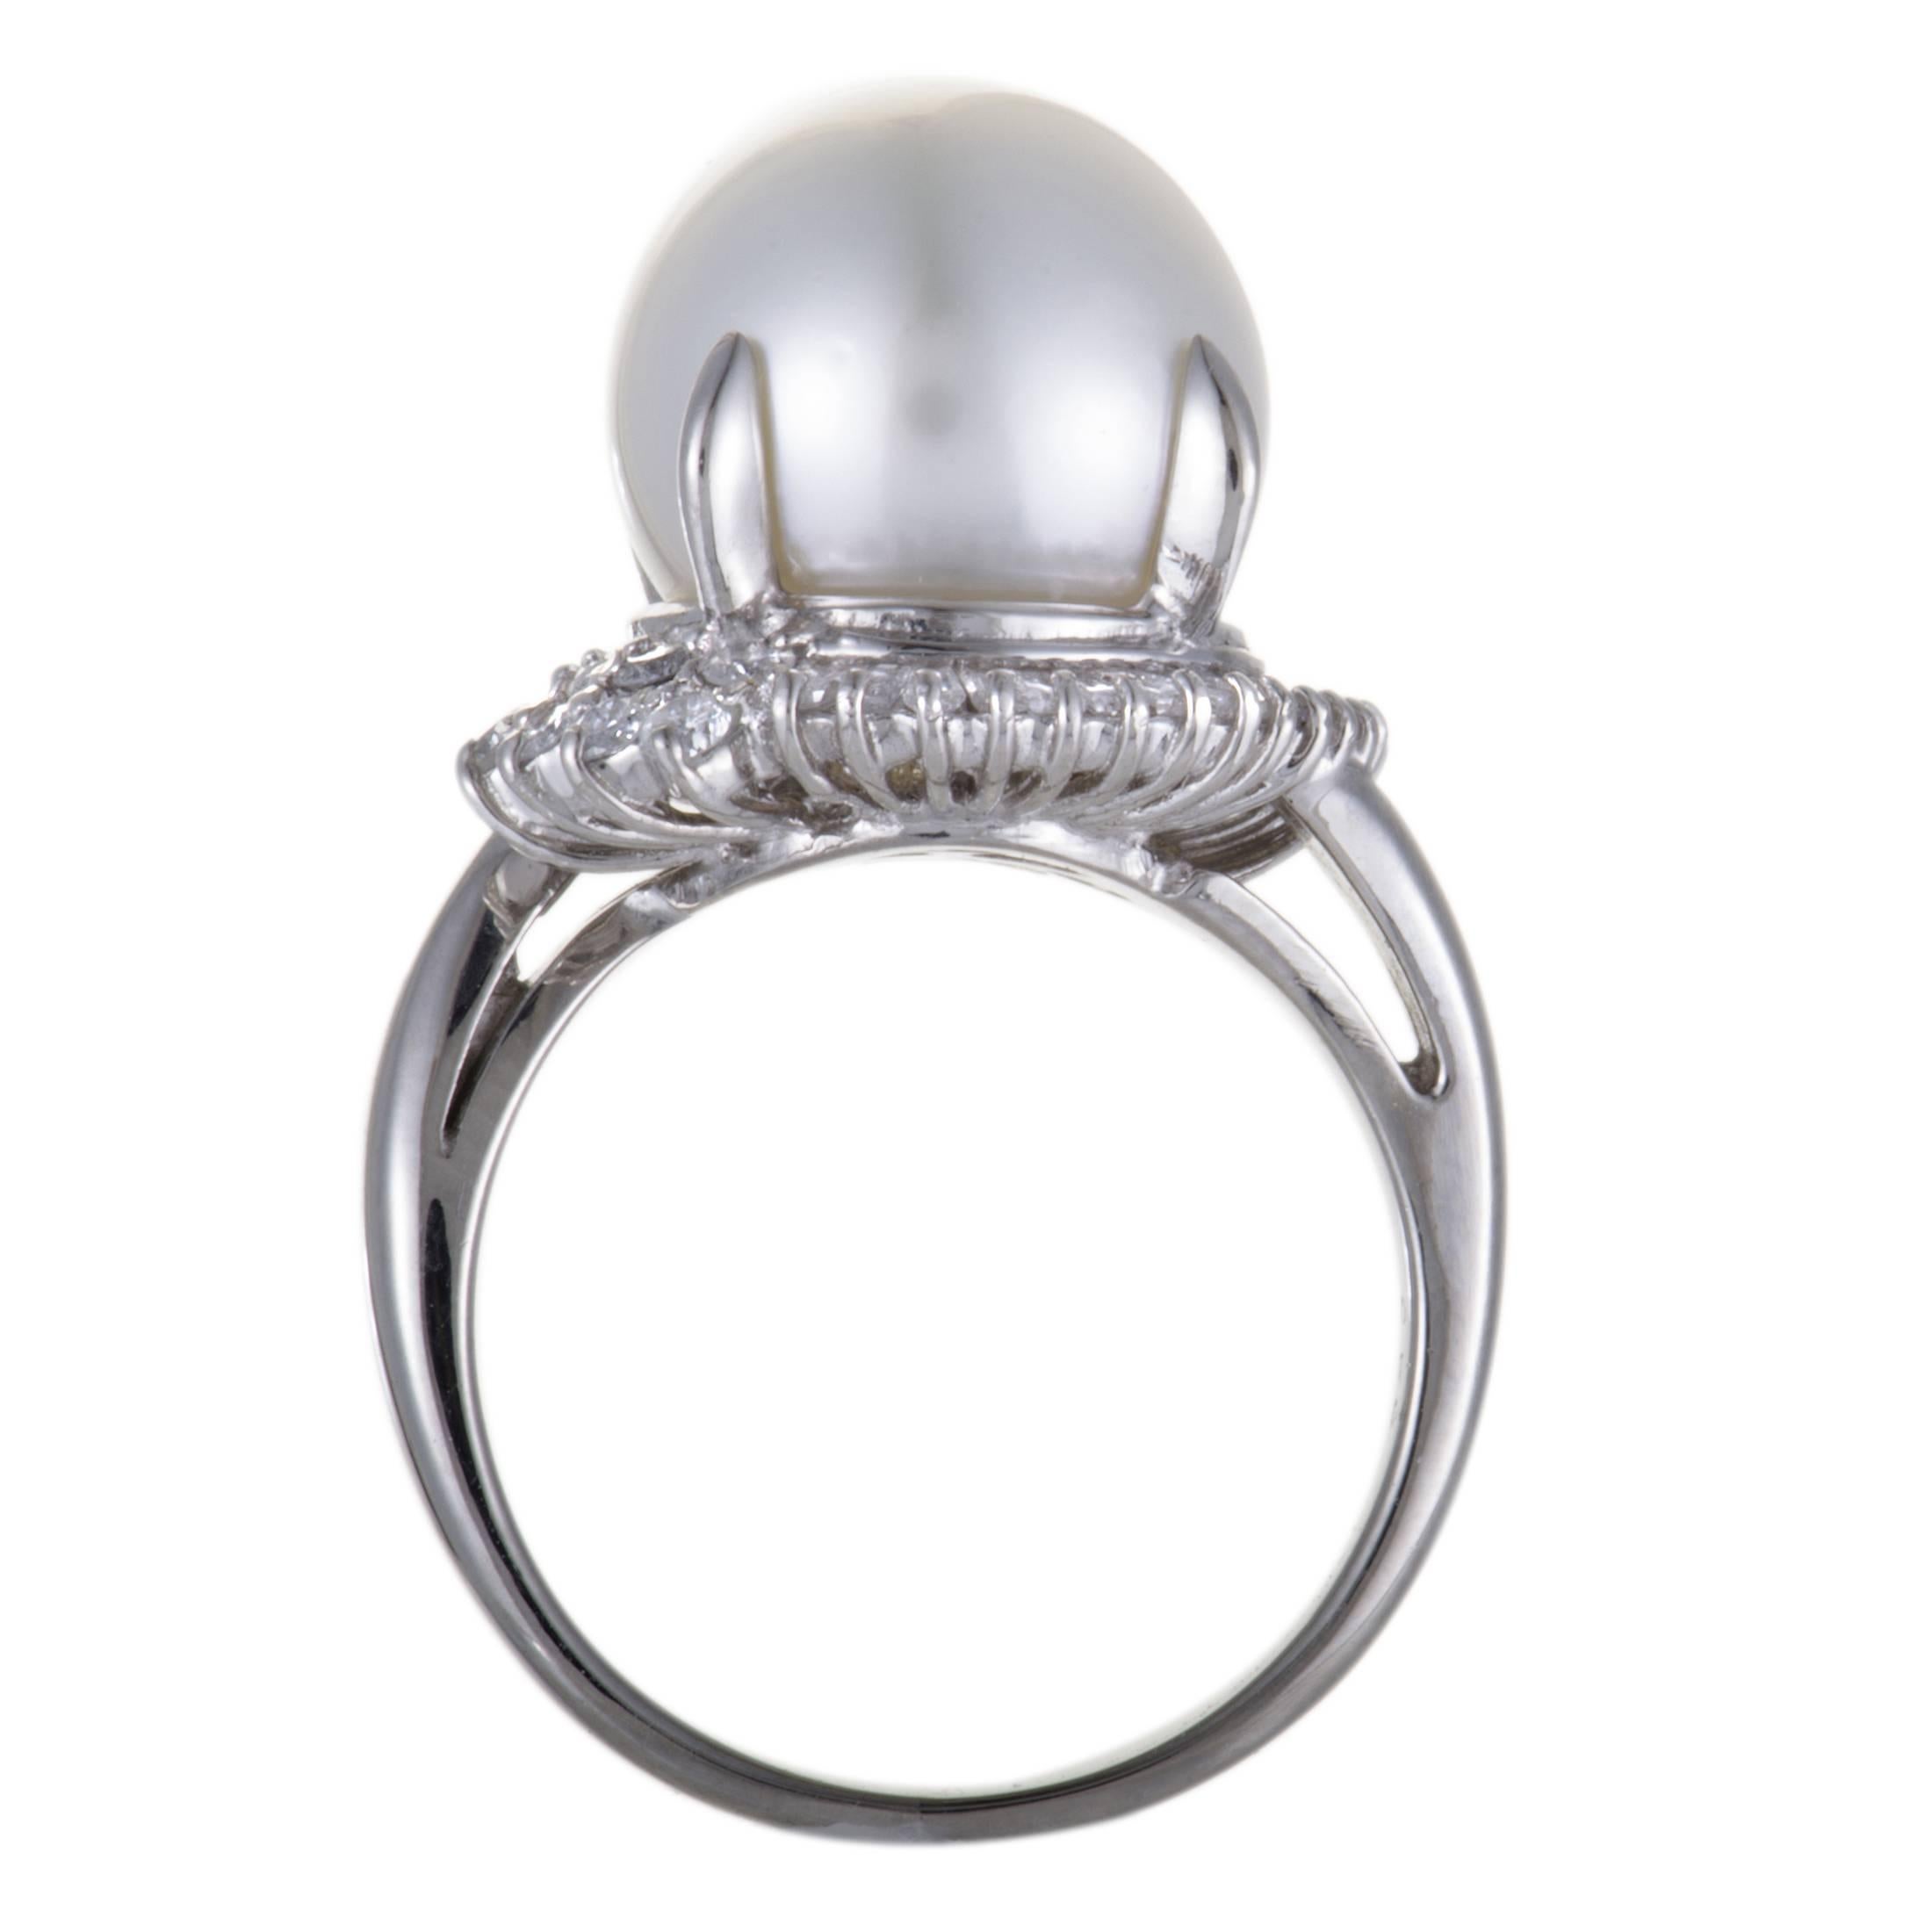 Offering a look of sublime elegance and refinement, this gorgeous ring is made of gleaming platinum and set with a splendidly feminine white pearl, while the 0.50 carats of scintillating diamond stones add a touch of ever-lasting brilliance to the